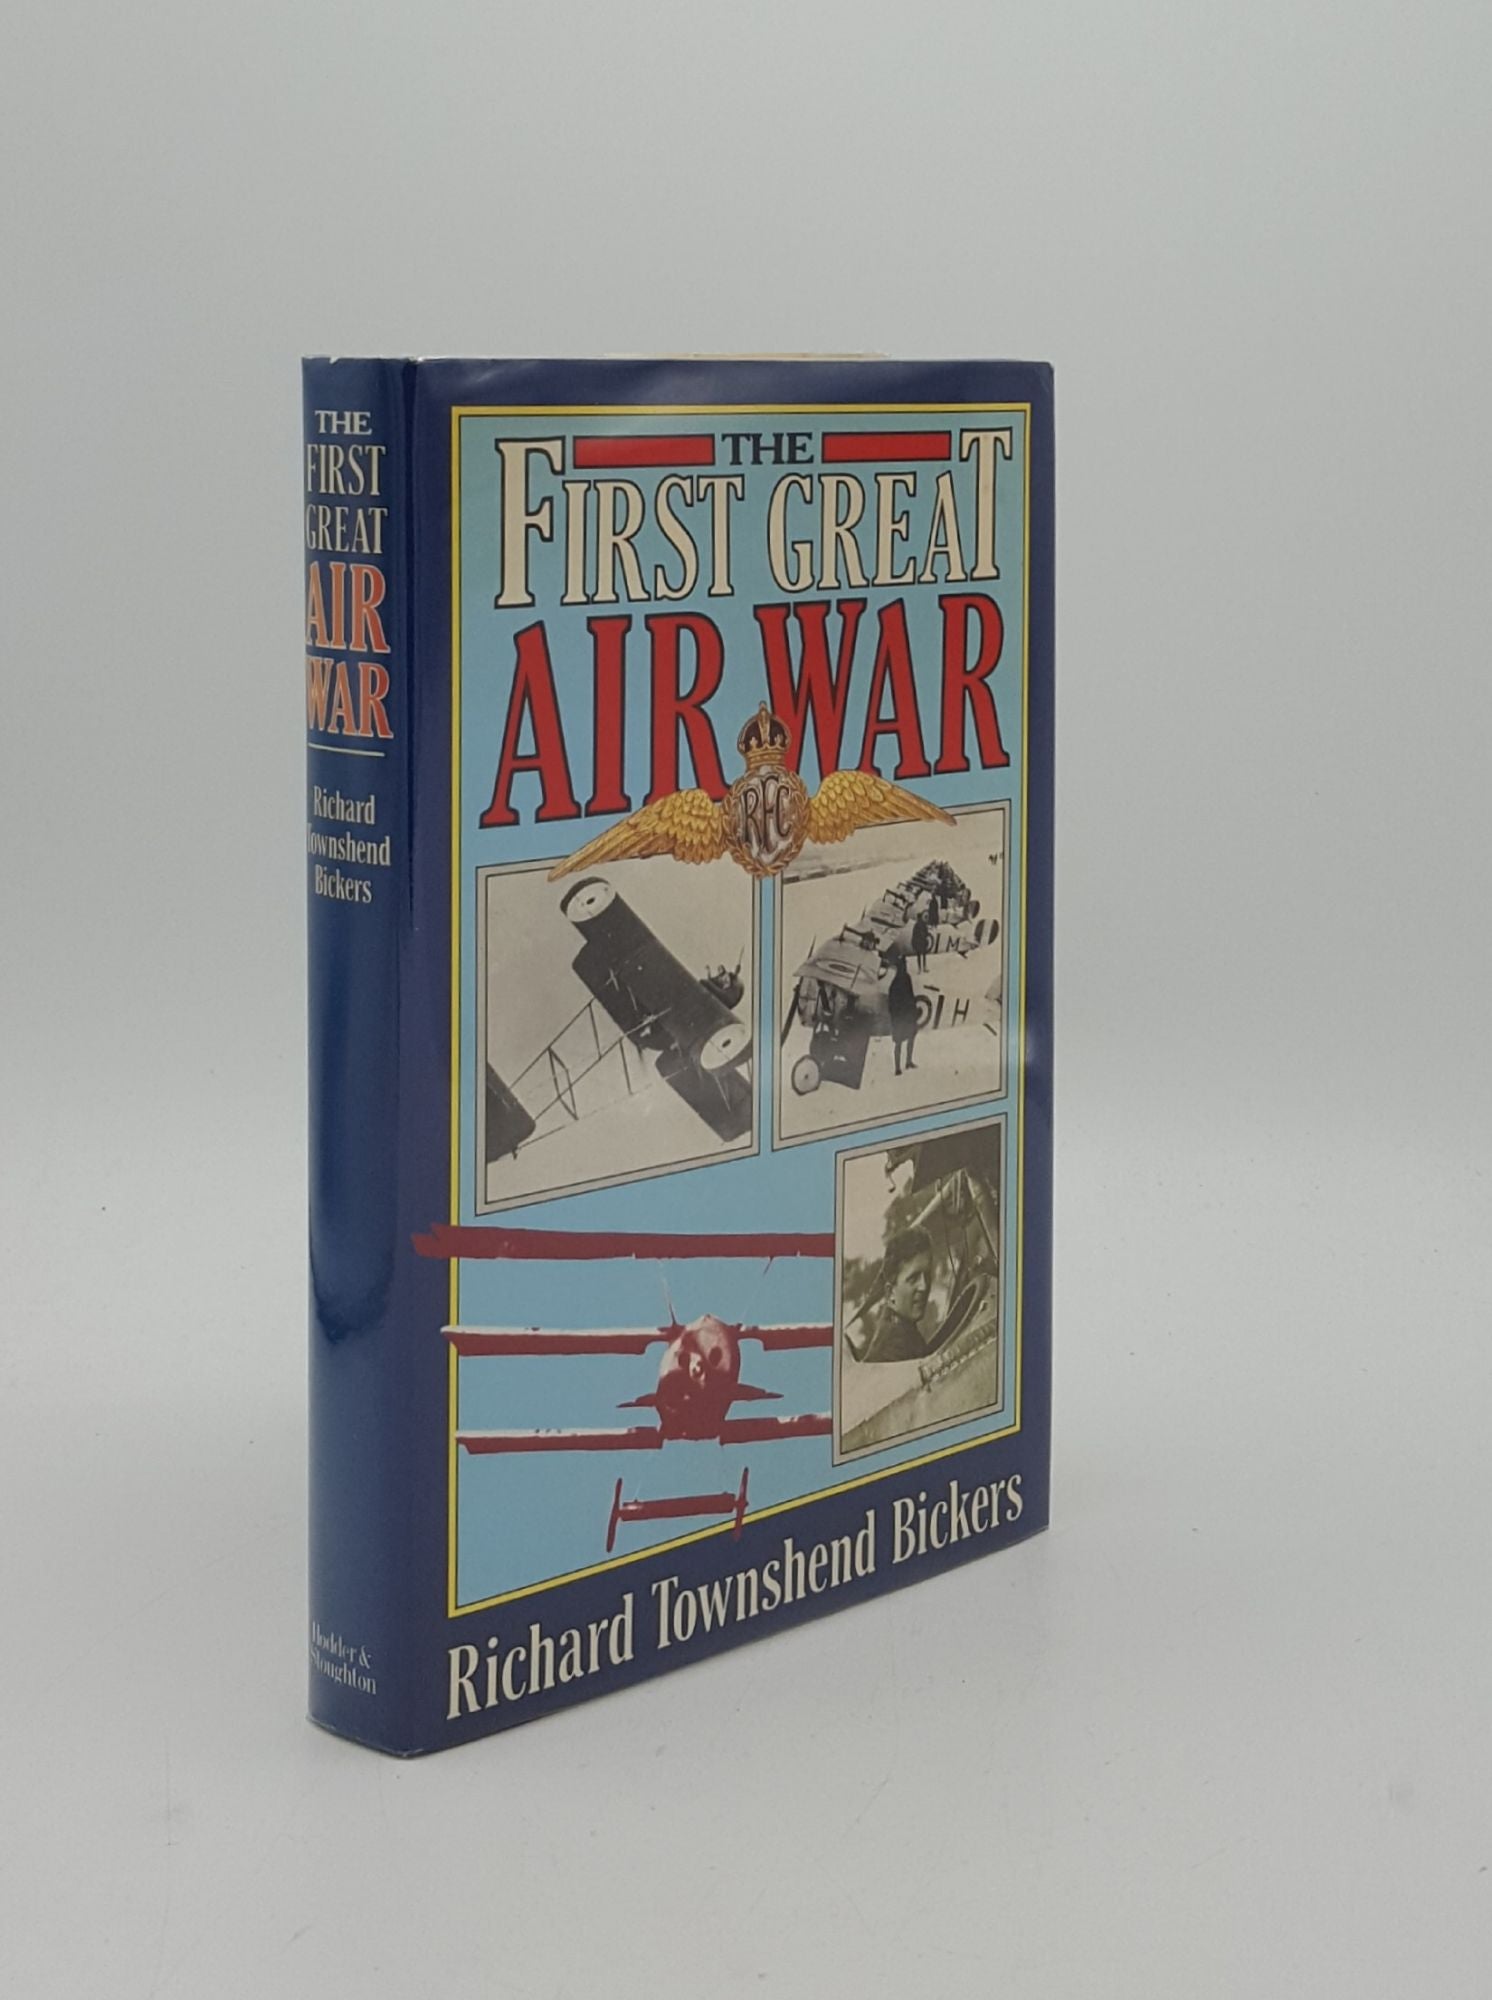 BICKERS Richard Townshend - The First Great Air War